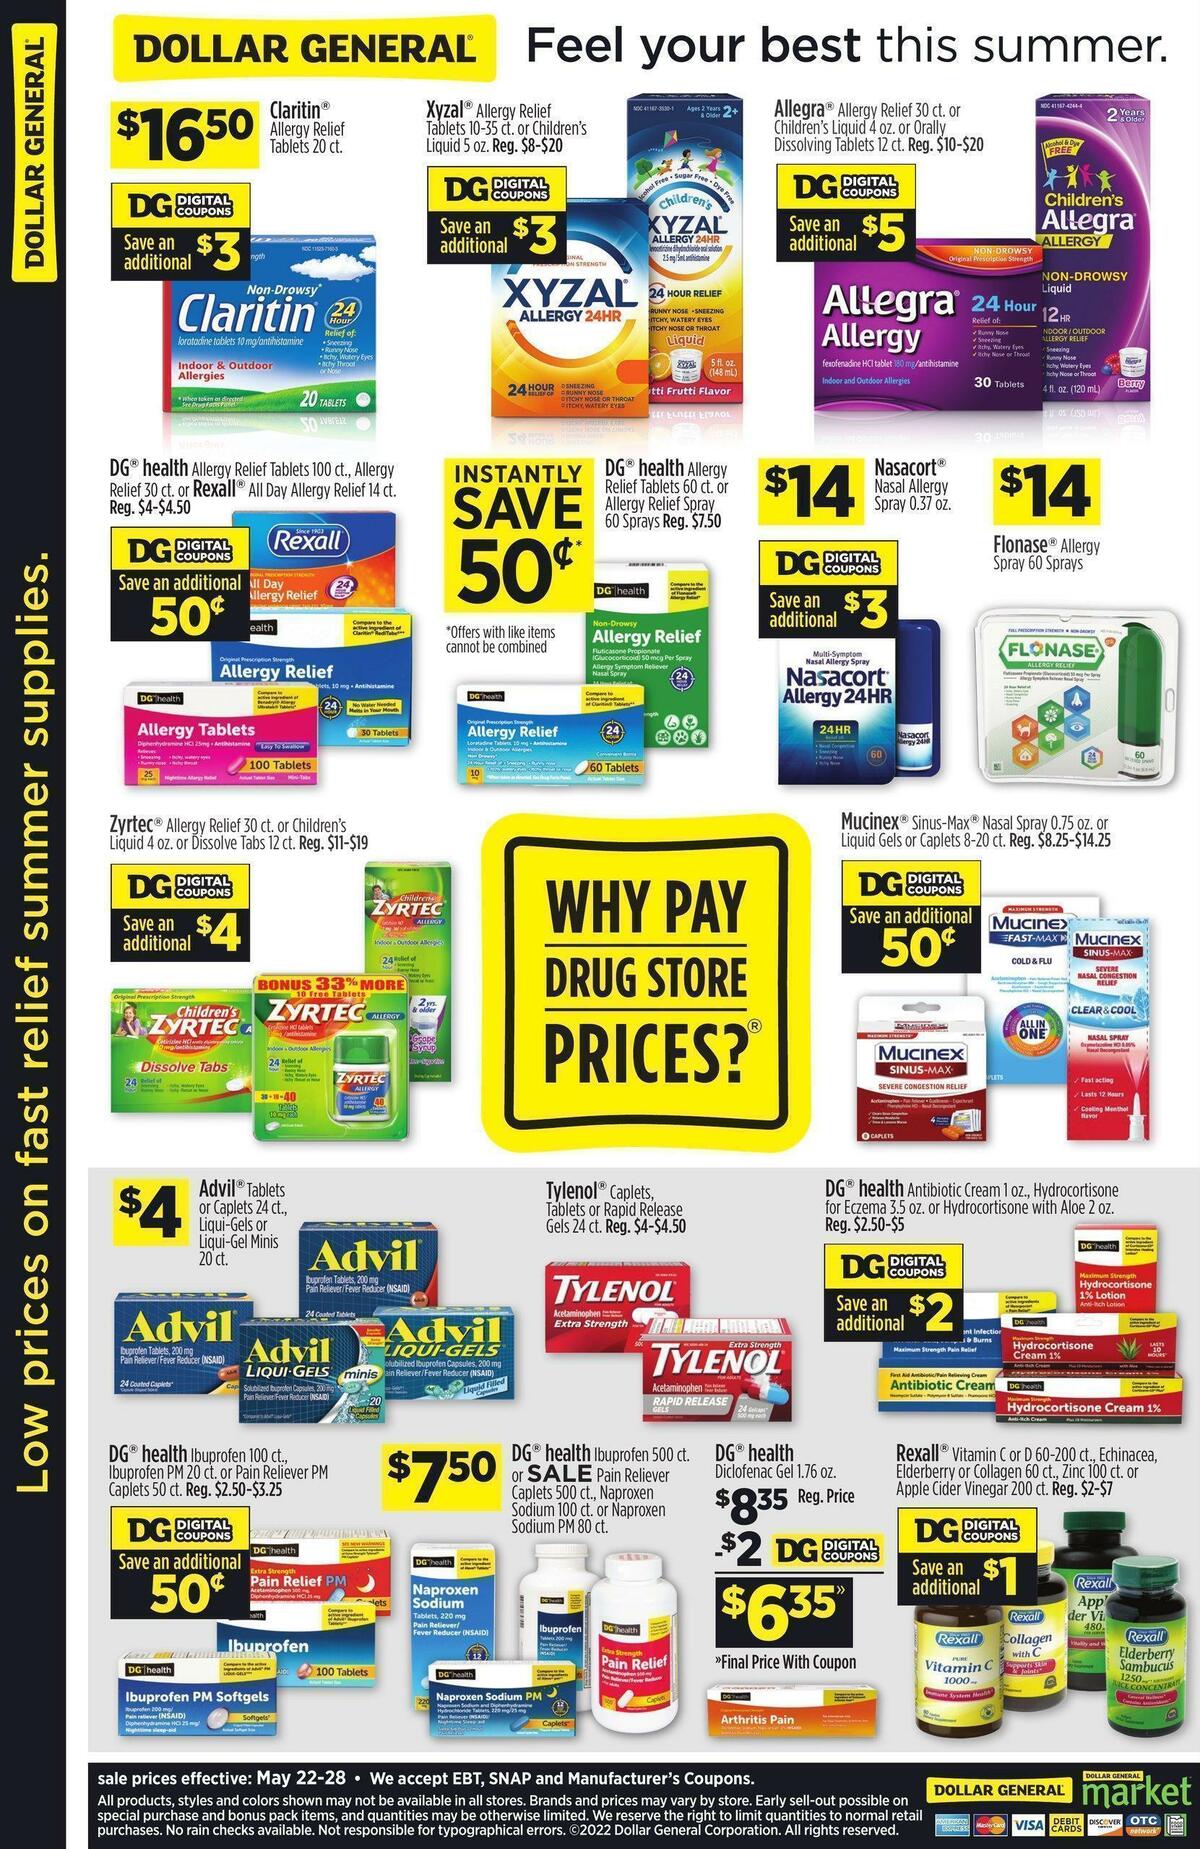 Dollar General Feel your best this summer Weekly Ad from May 22